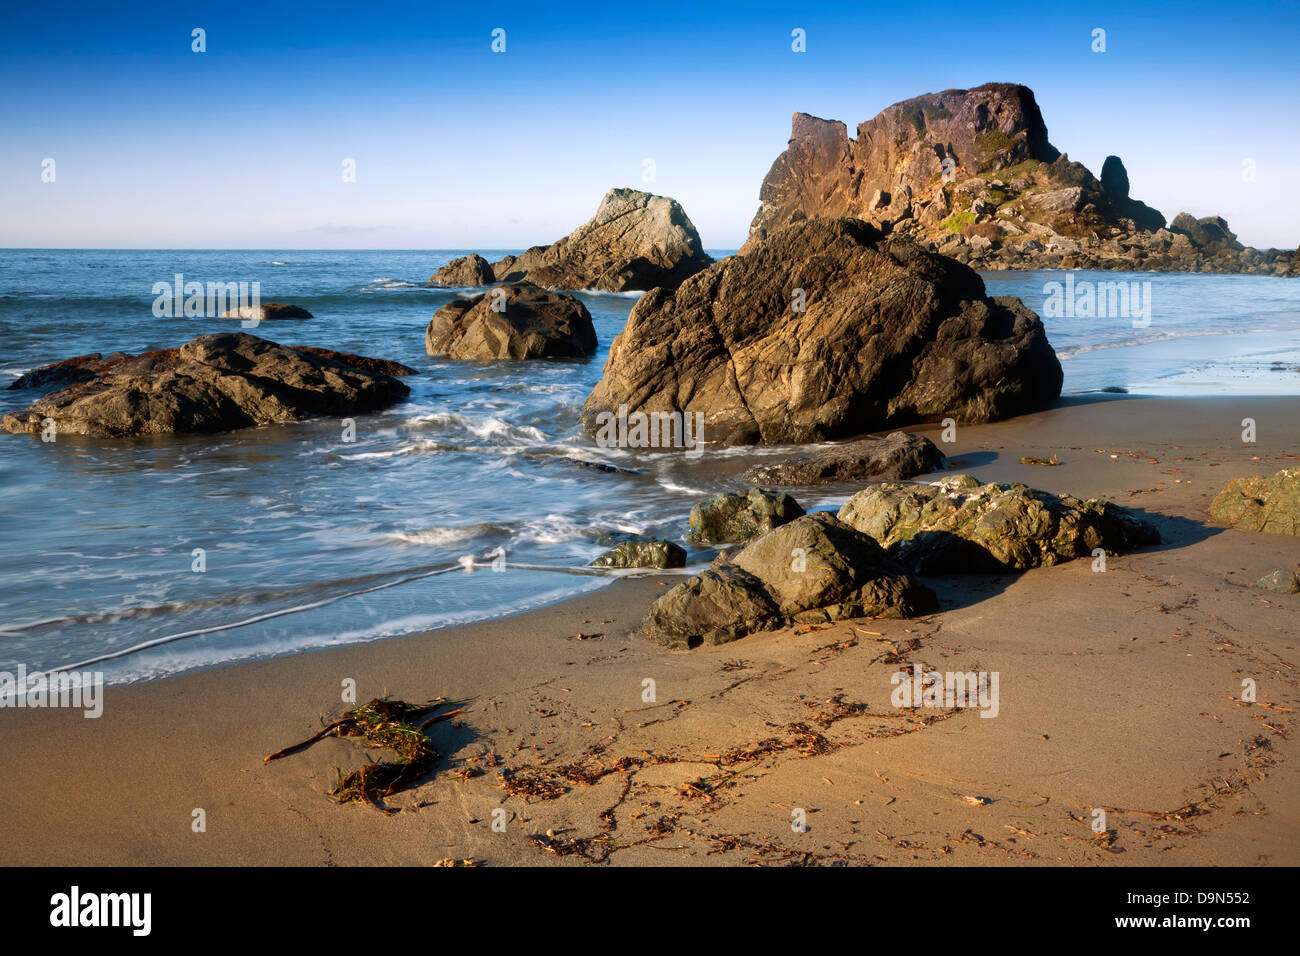 .OREGON - Islands and seastacks from Rock Beach at the edge of the Pacific Ocean in Harris Beach State Recreation Area. Stock Photo